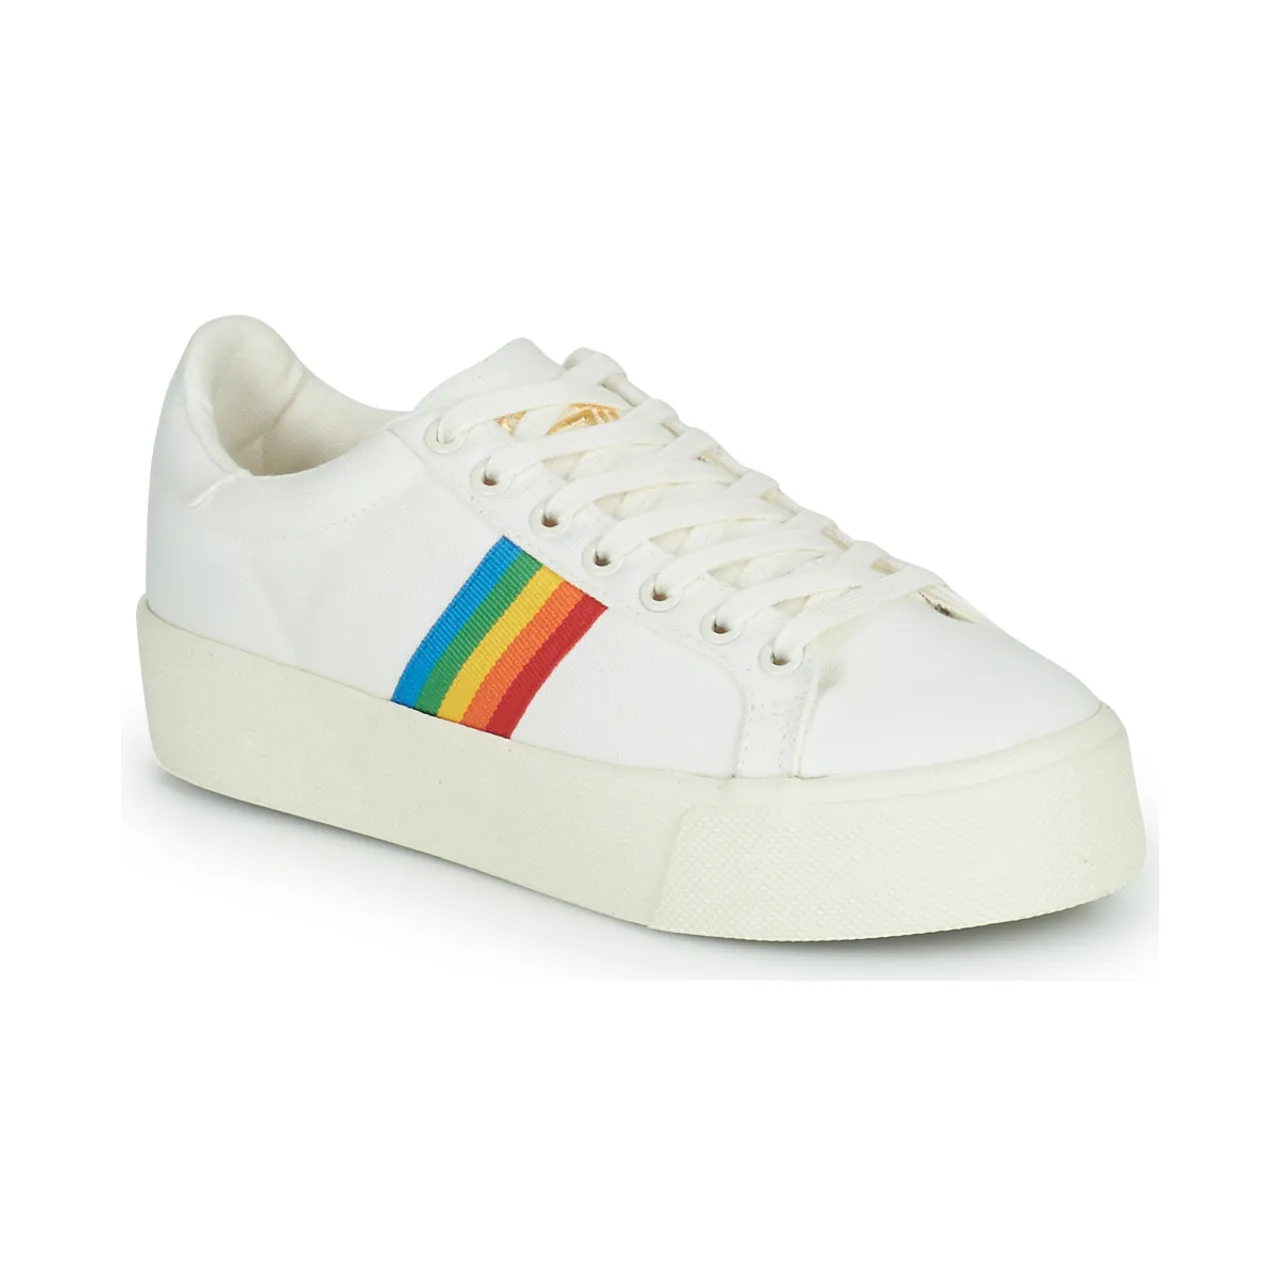 Gola  ORCHID PLATFORM RAINBOW  women's Shoes (Trainers) in White